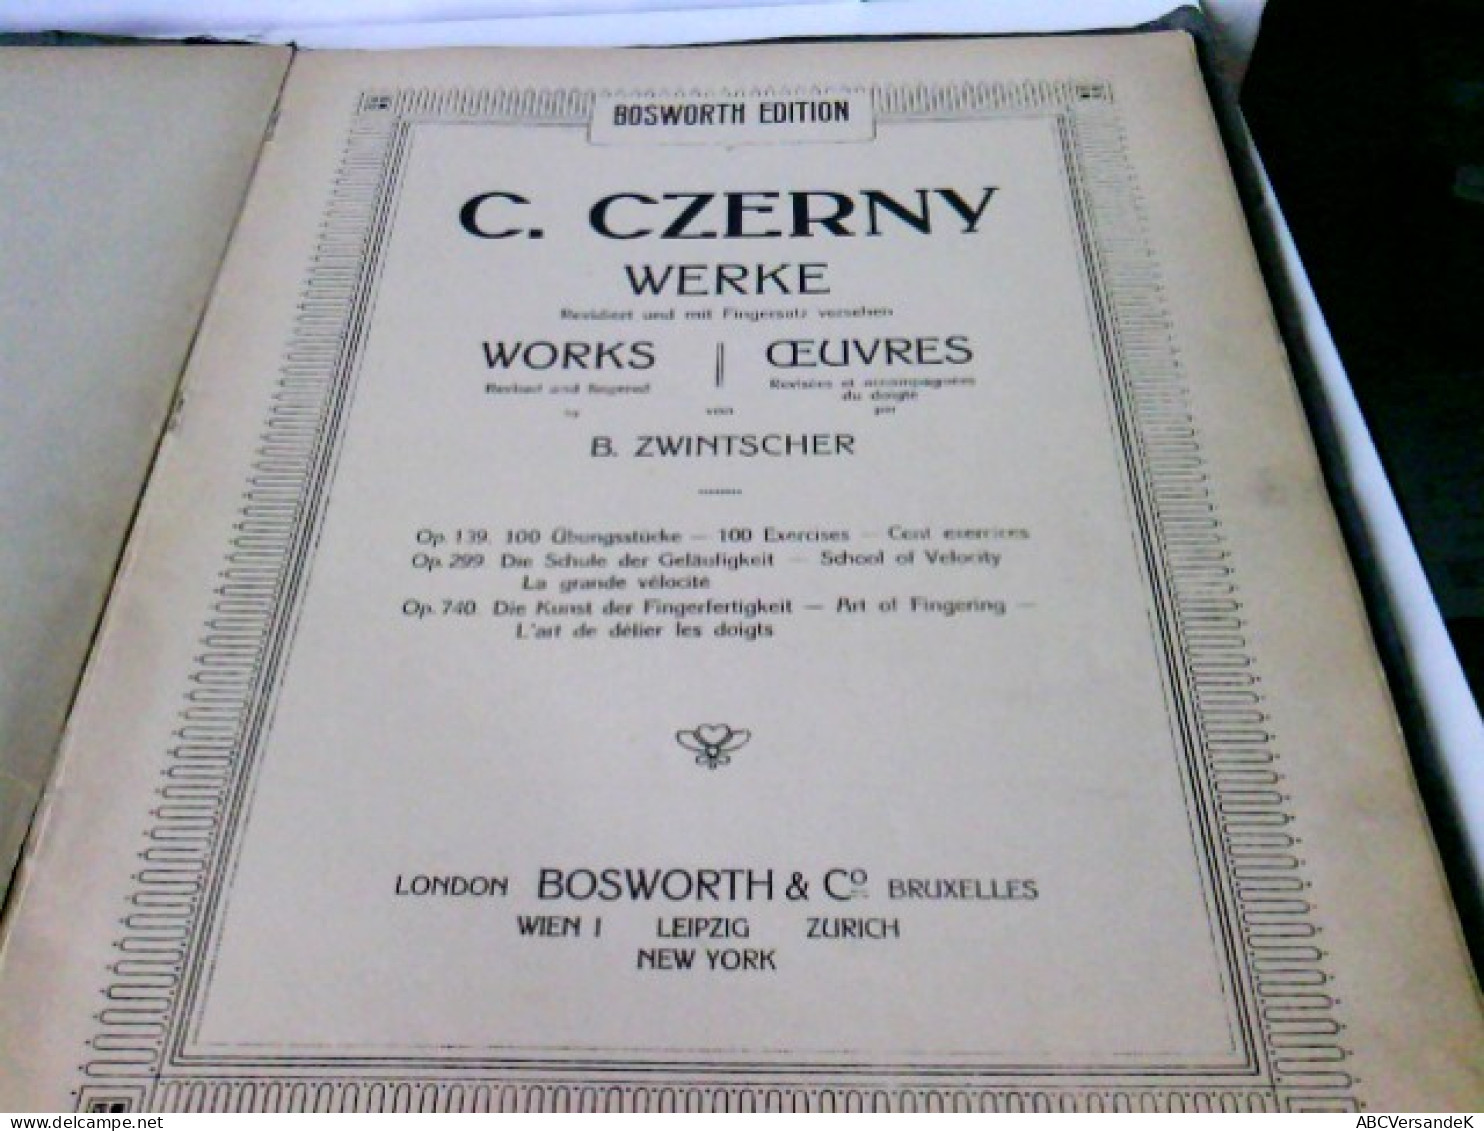 Opus 139. 100 Uebungsstücke - 100 Exercises - Cent Exercices: Bosworth Edition (B & Co. 892. 2392/3) - Musica